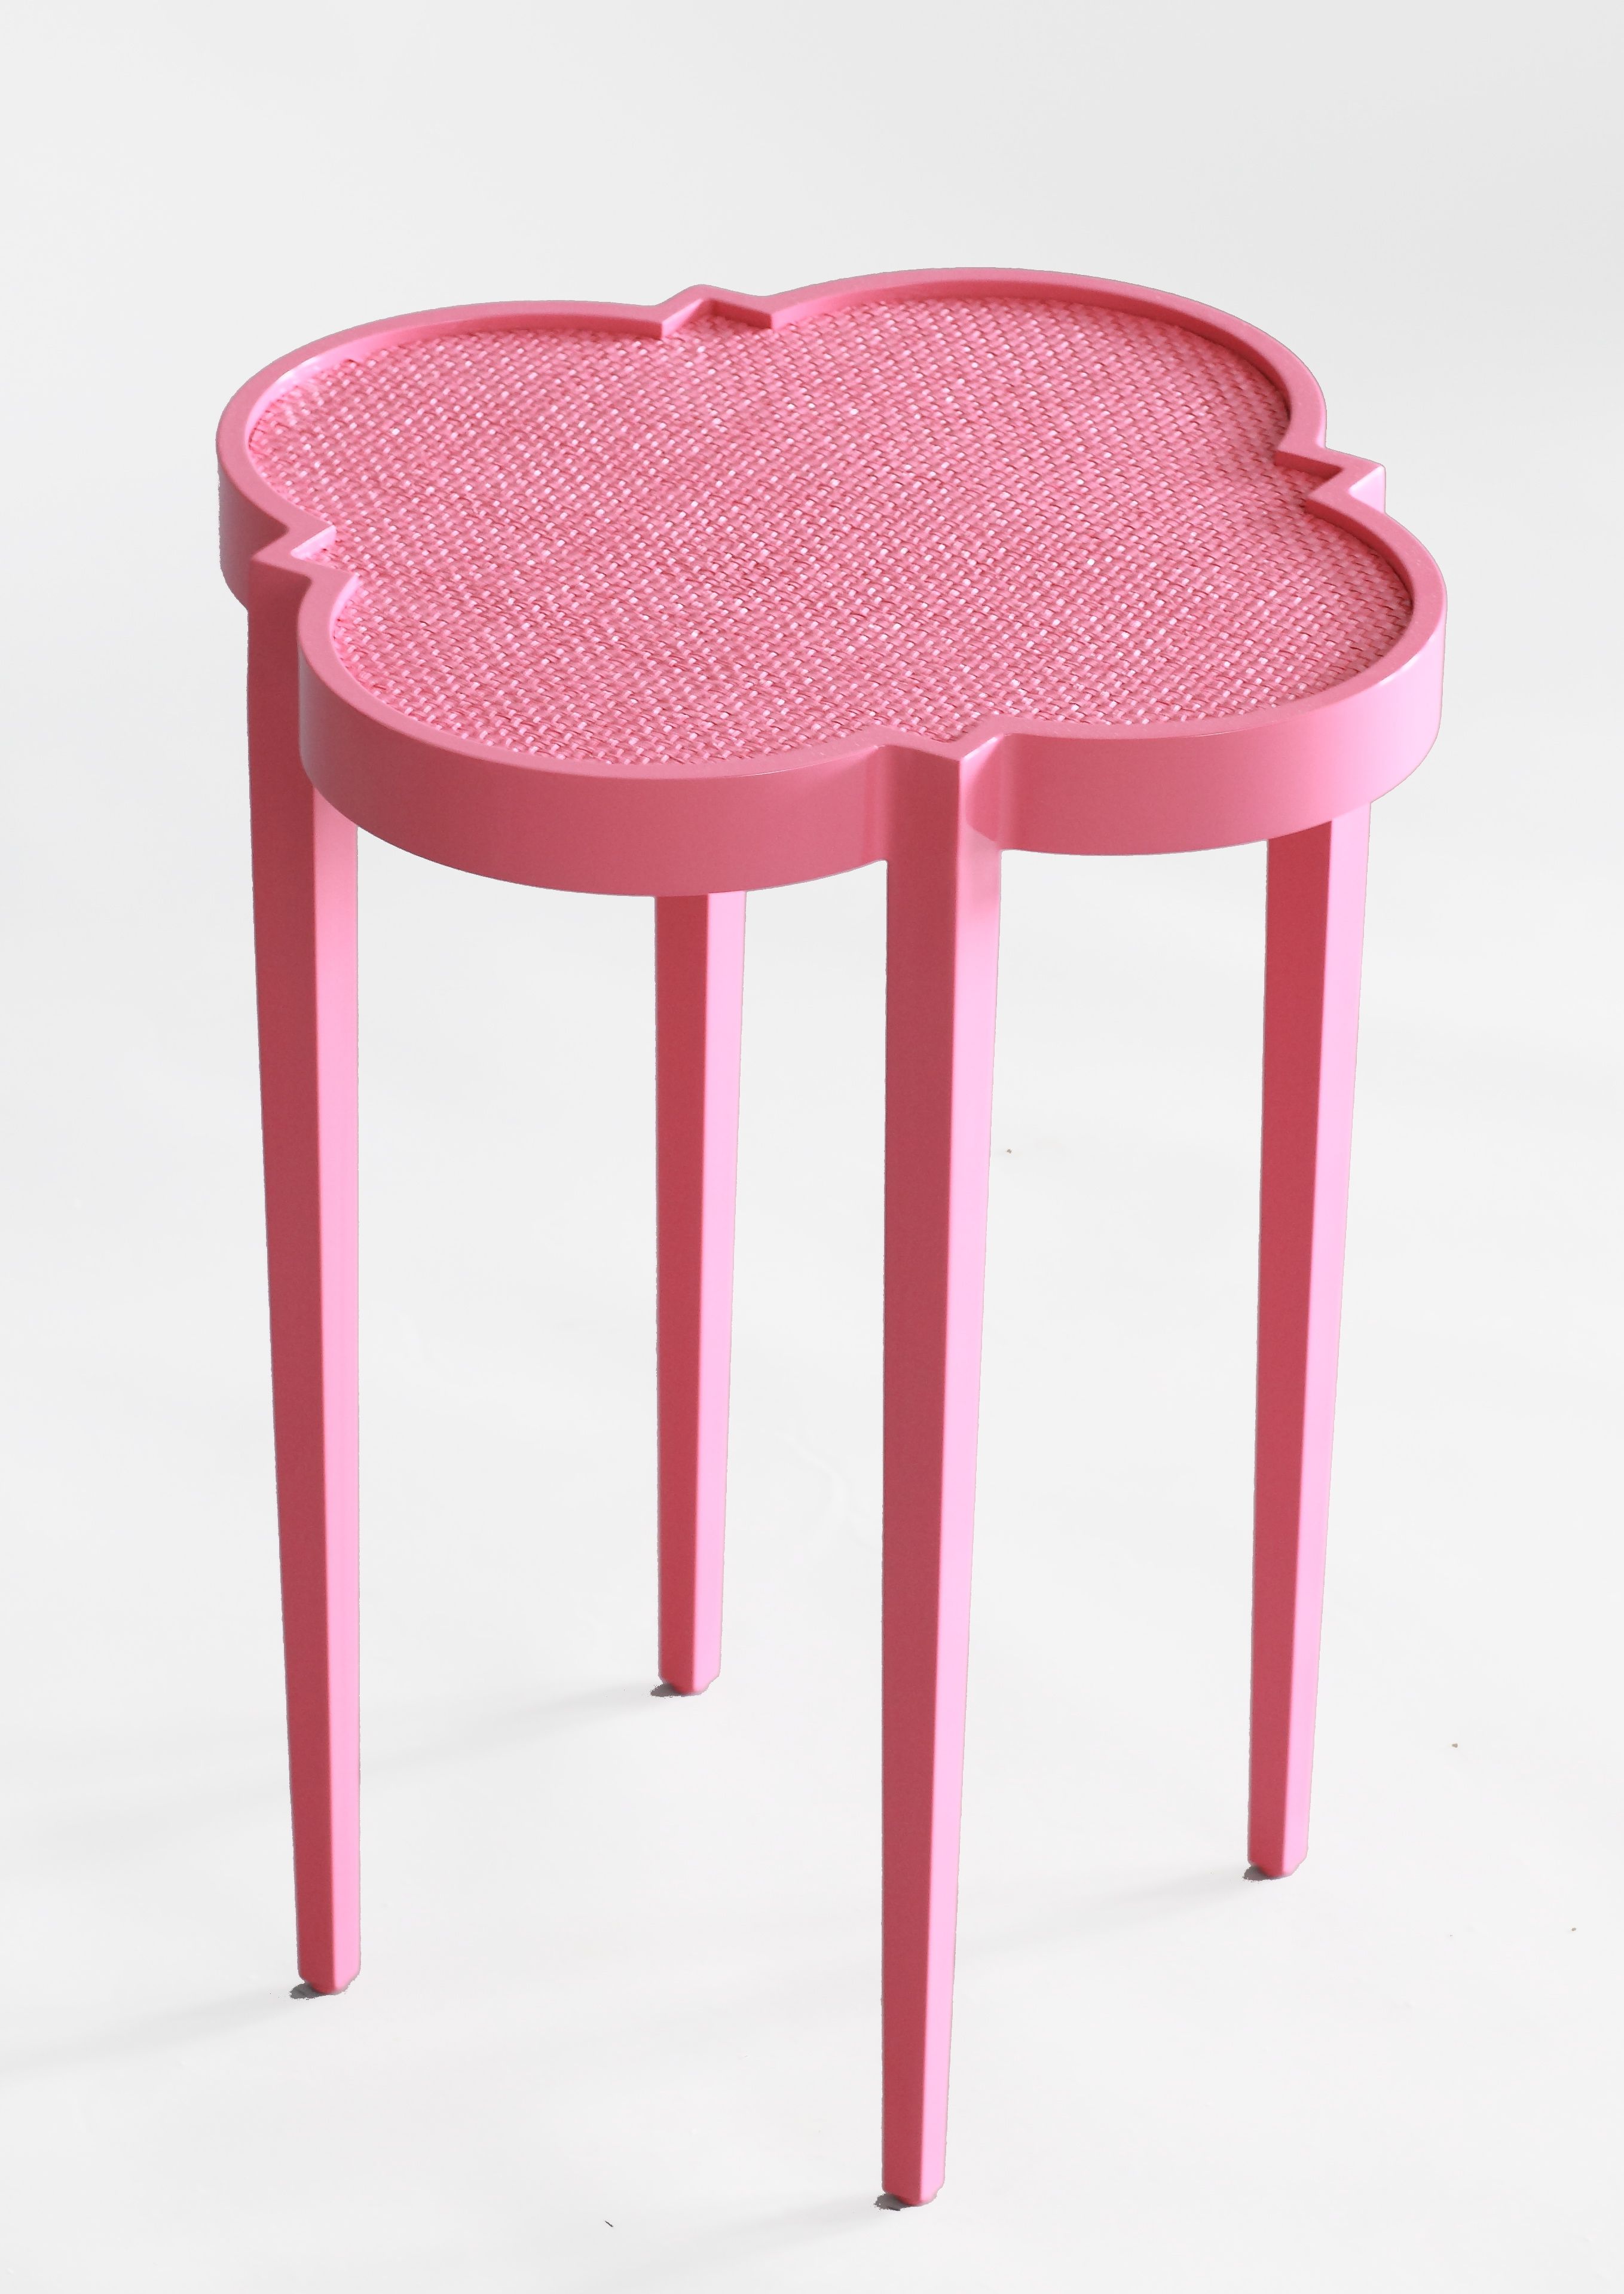 tini table pink our passion quatrefoil tables metal accent oomph eros trestle base bar chairs crystal lamp pier one nesting bedroom furniture floating end bronze patio side